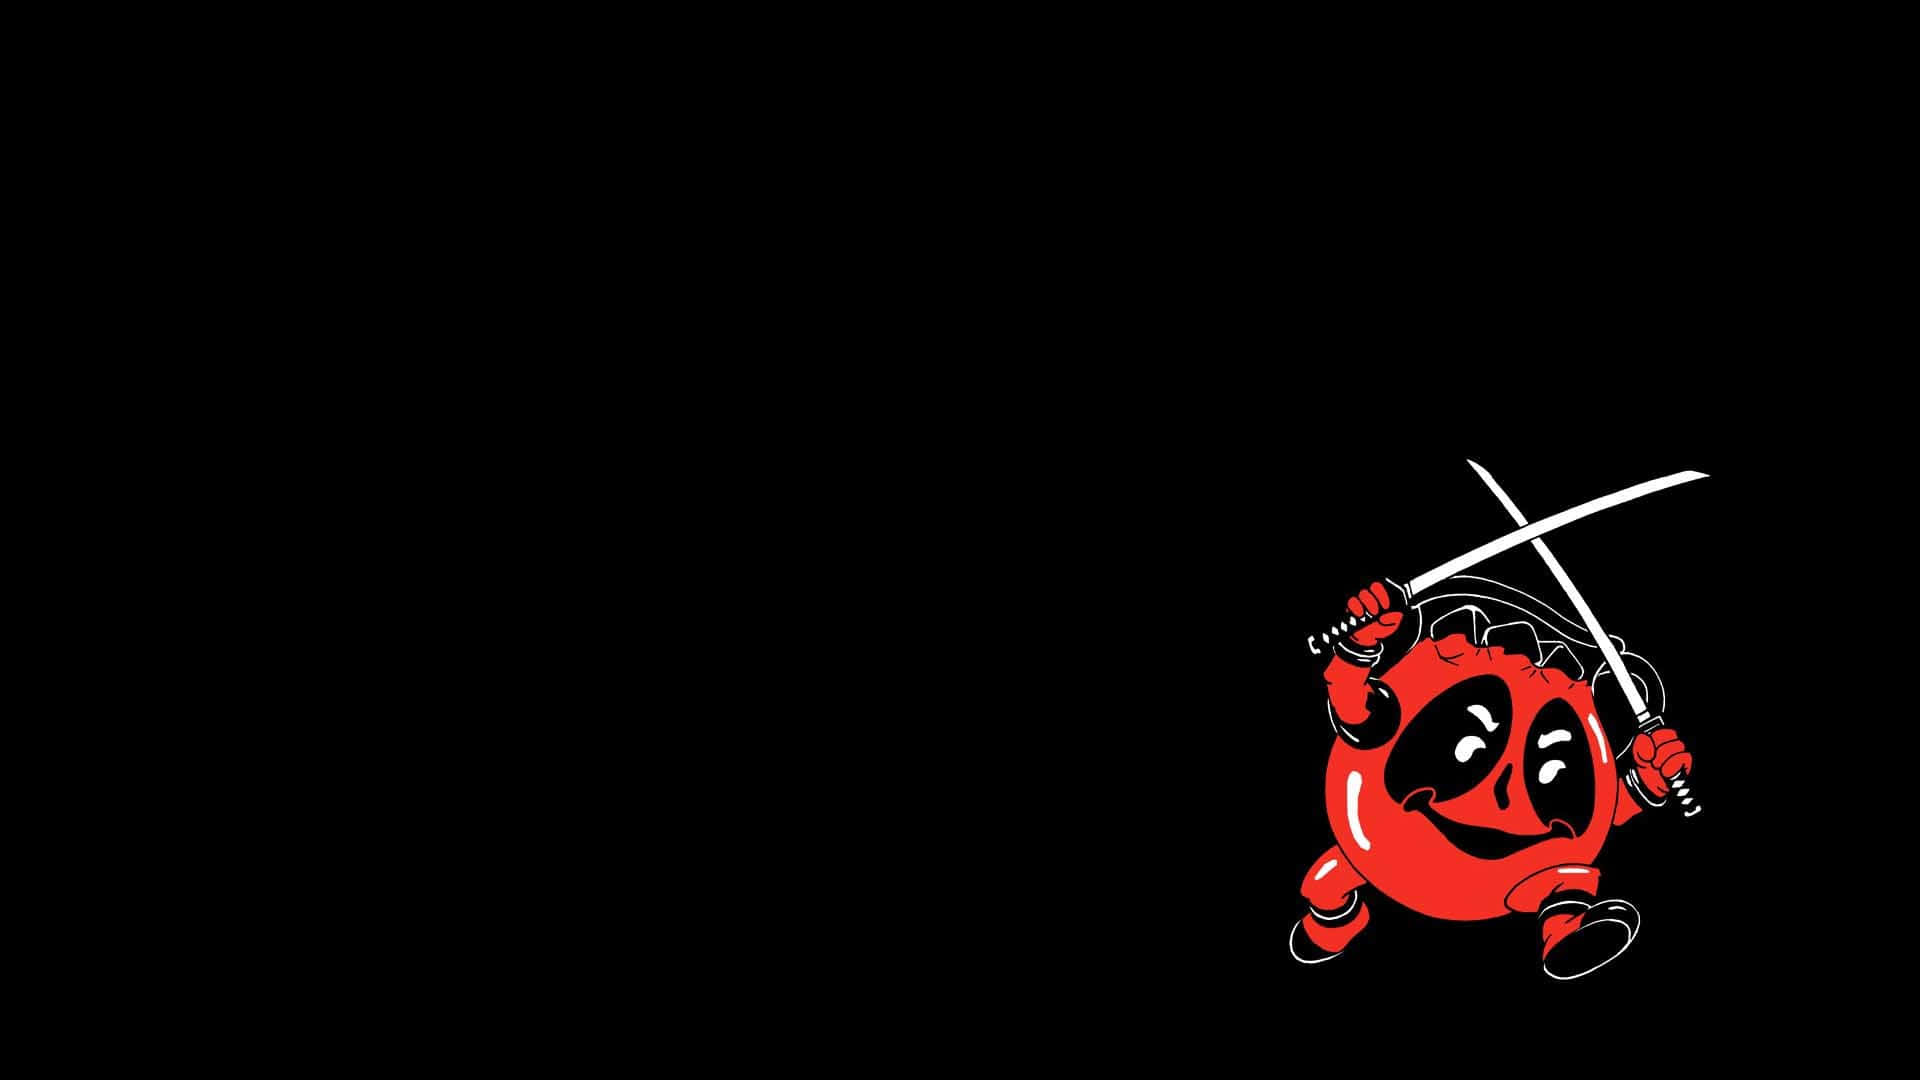 Cool Red Character D Jing Wallpaper